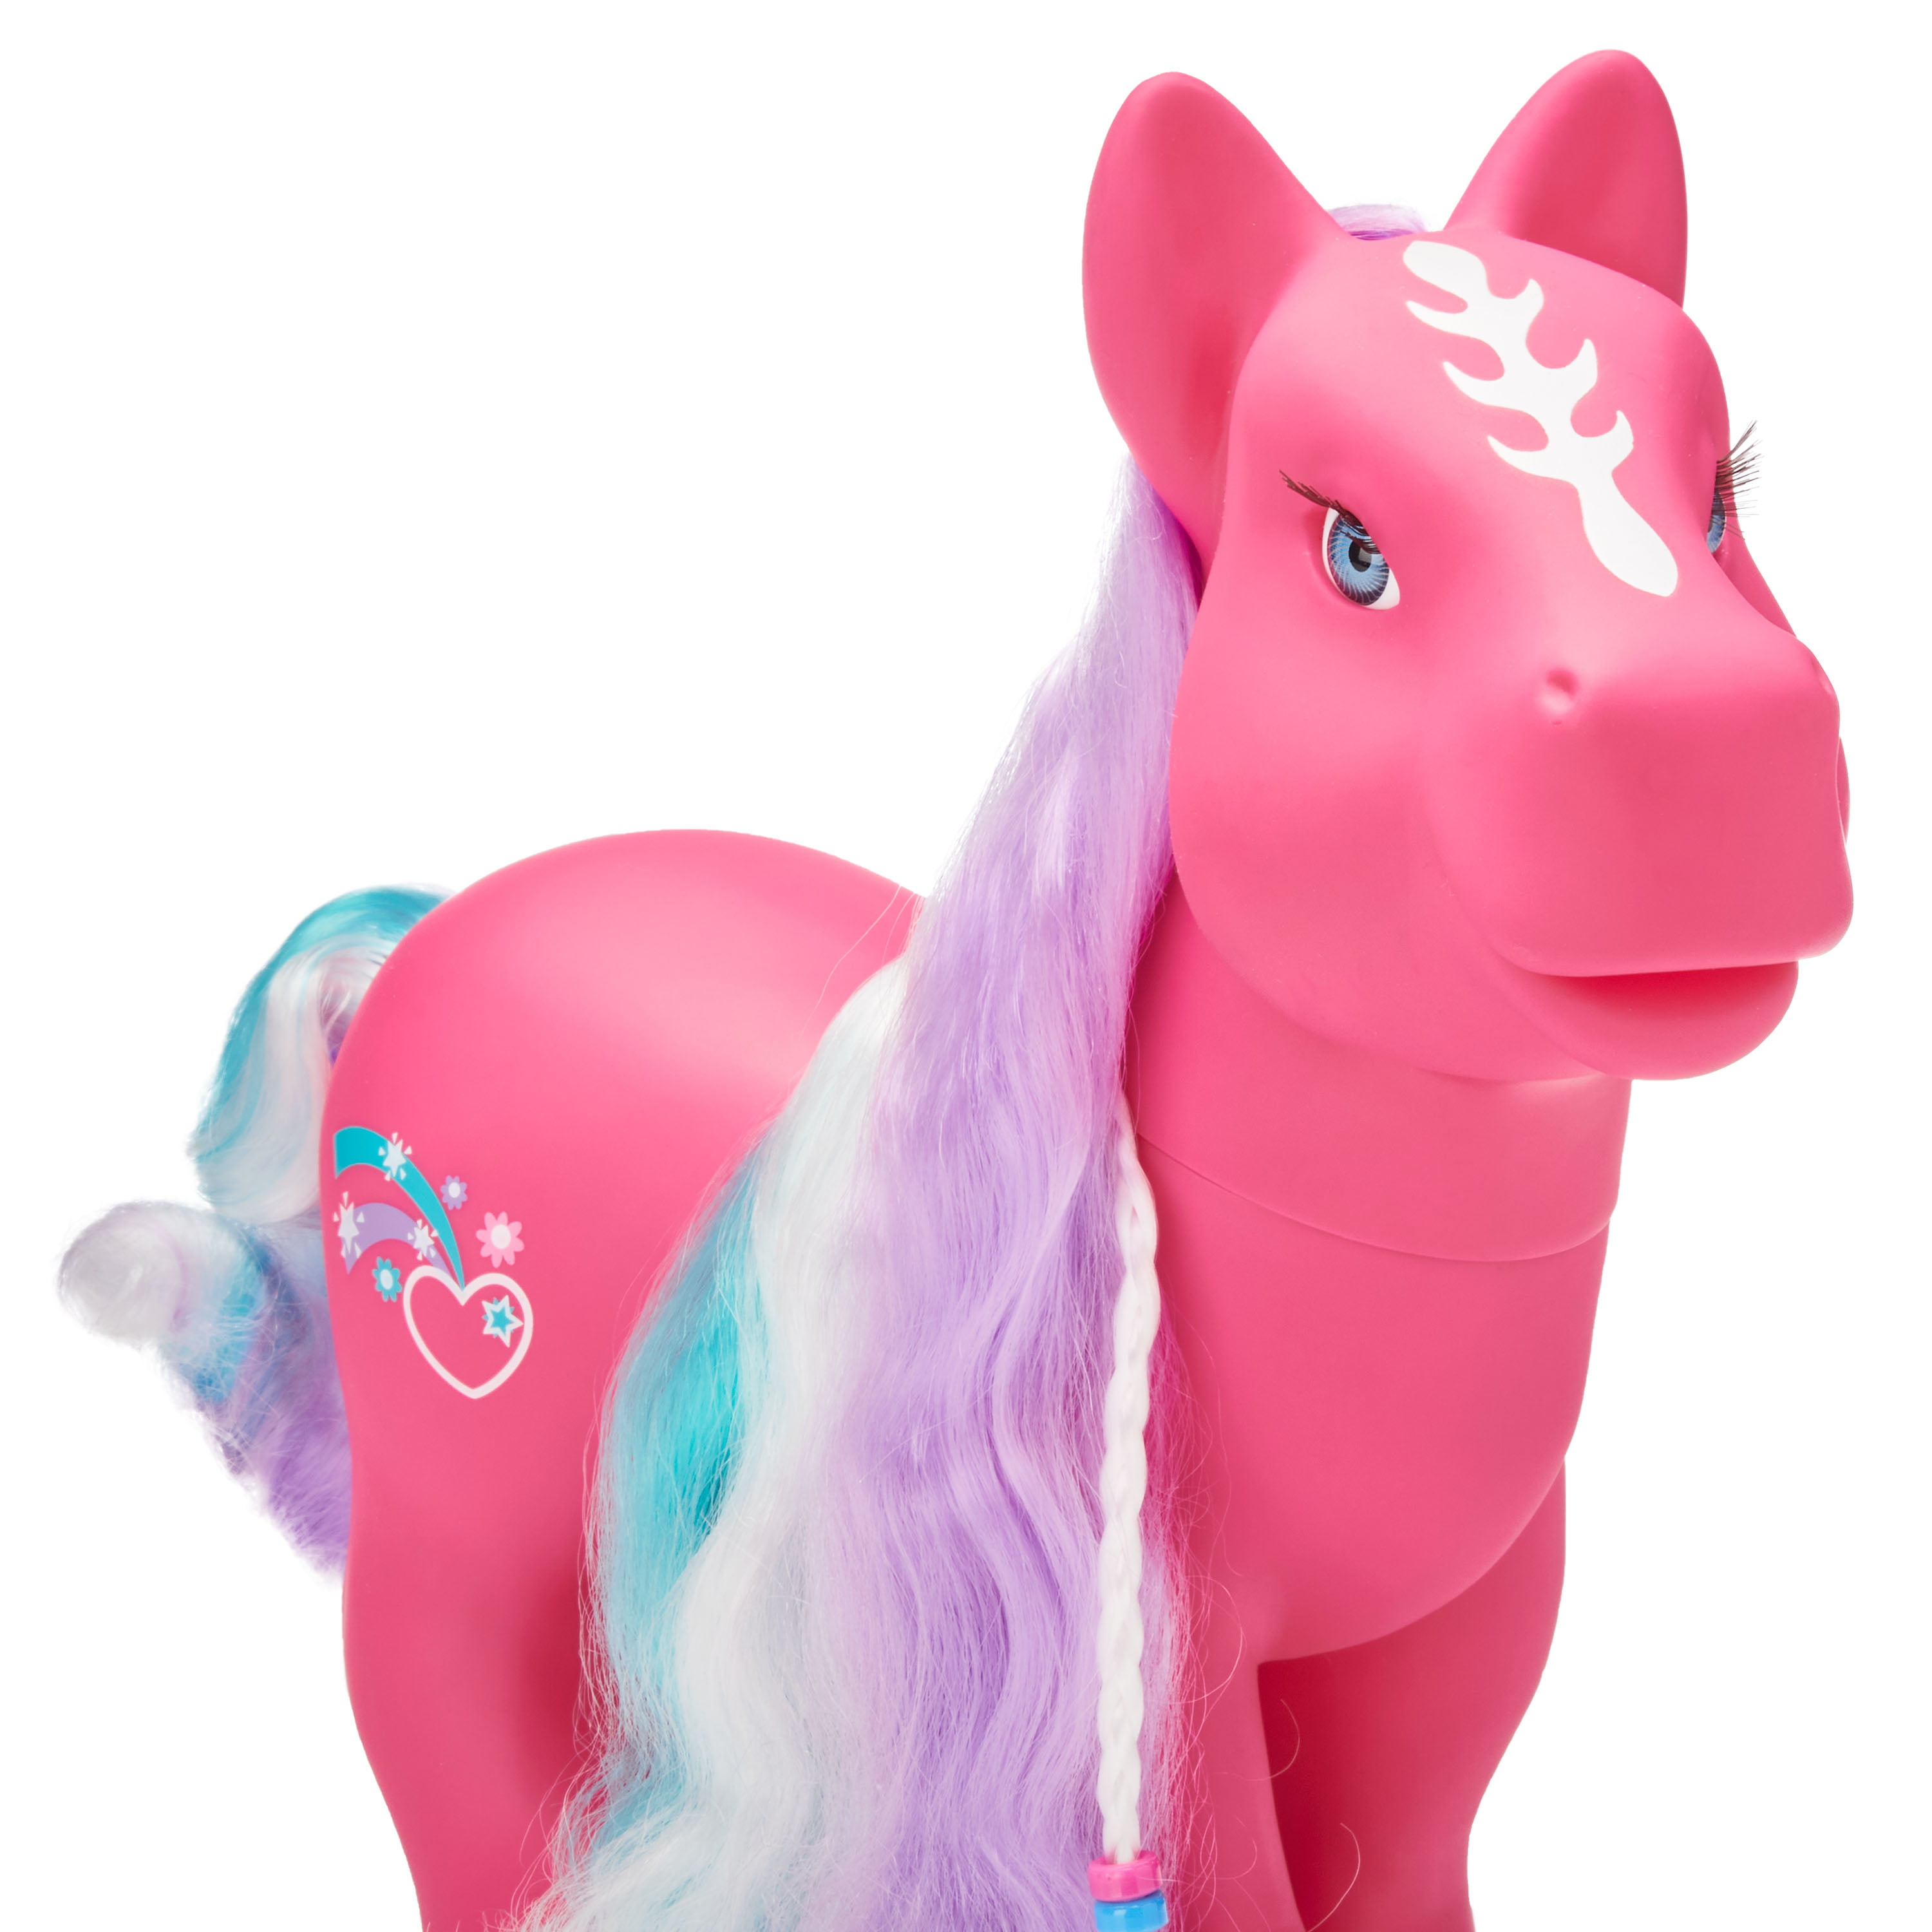 SET OF 2 PRETTY PONY WITH ACCESSORIES GIRLS TOY GIFT BRUSHABLE HAIR LARGE NEW 